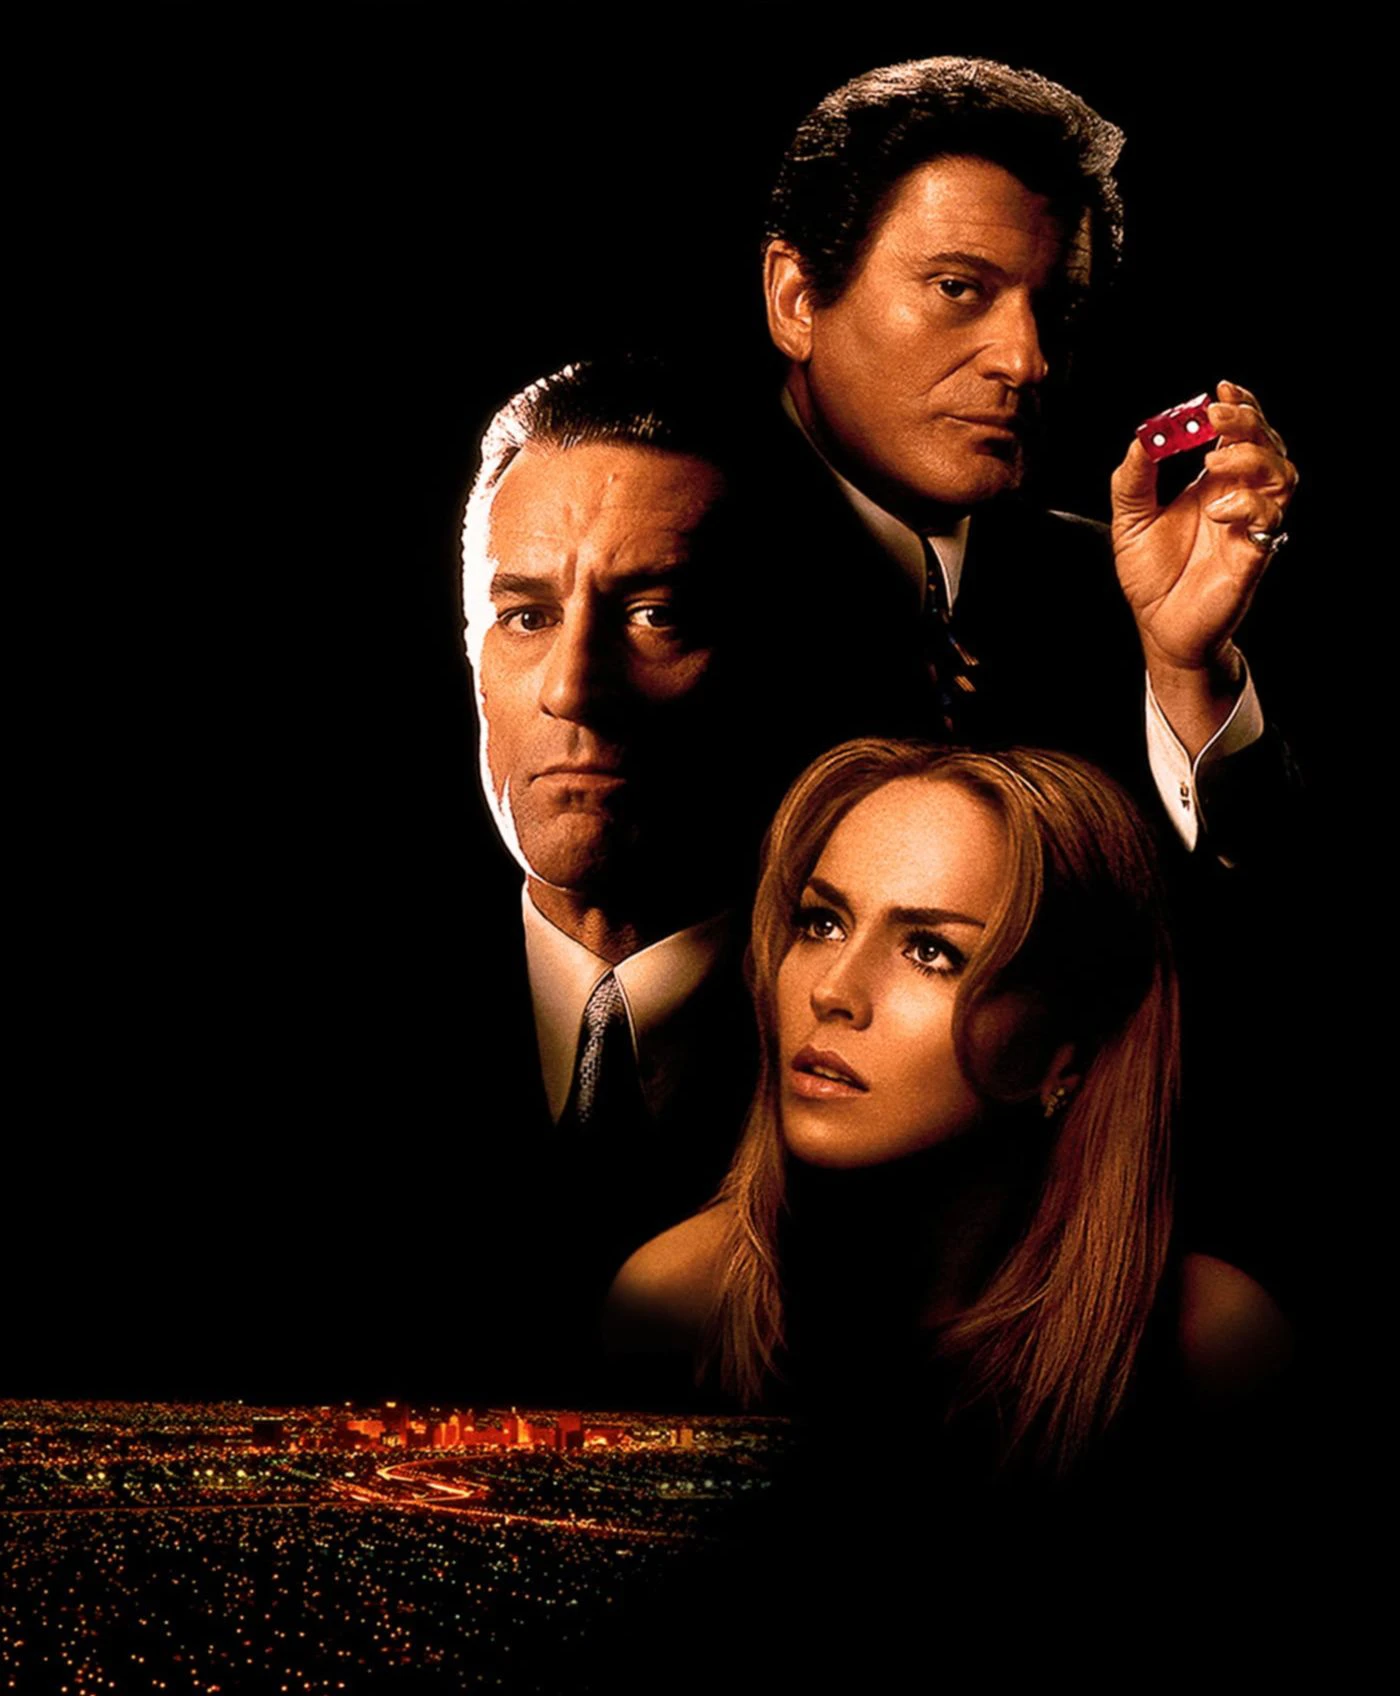 Paradise Lost: How Martin Scorsese’s ‘Casino’ Charts the Rise and Fall of a Criminal Empire